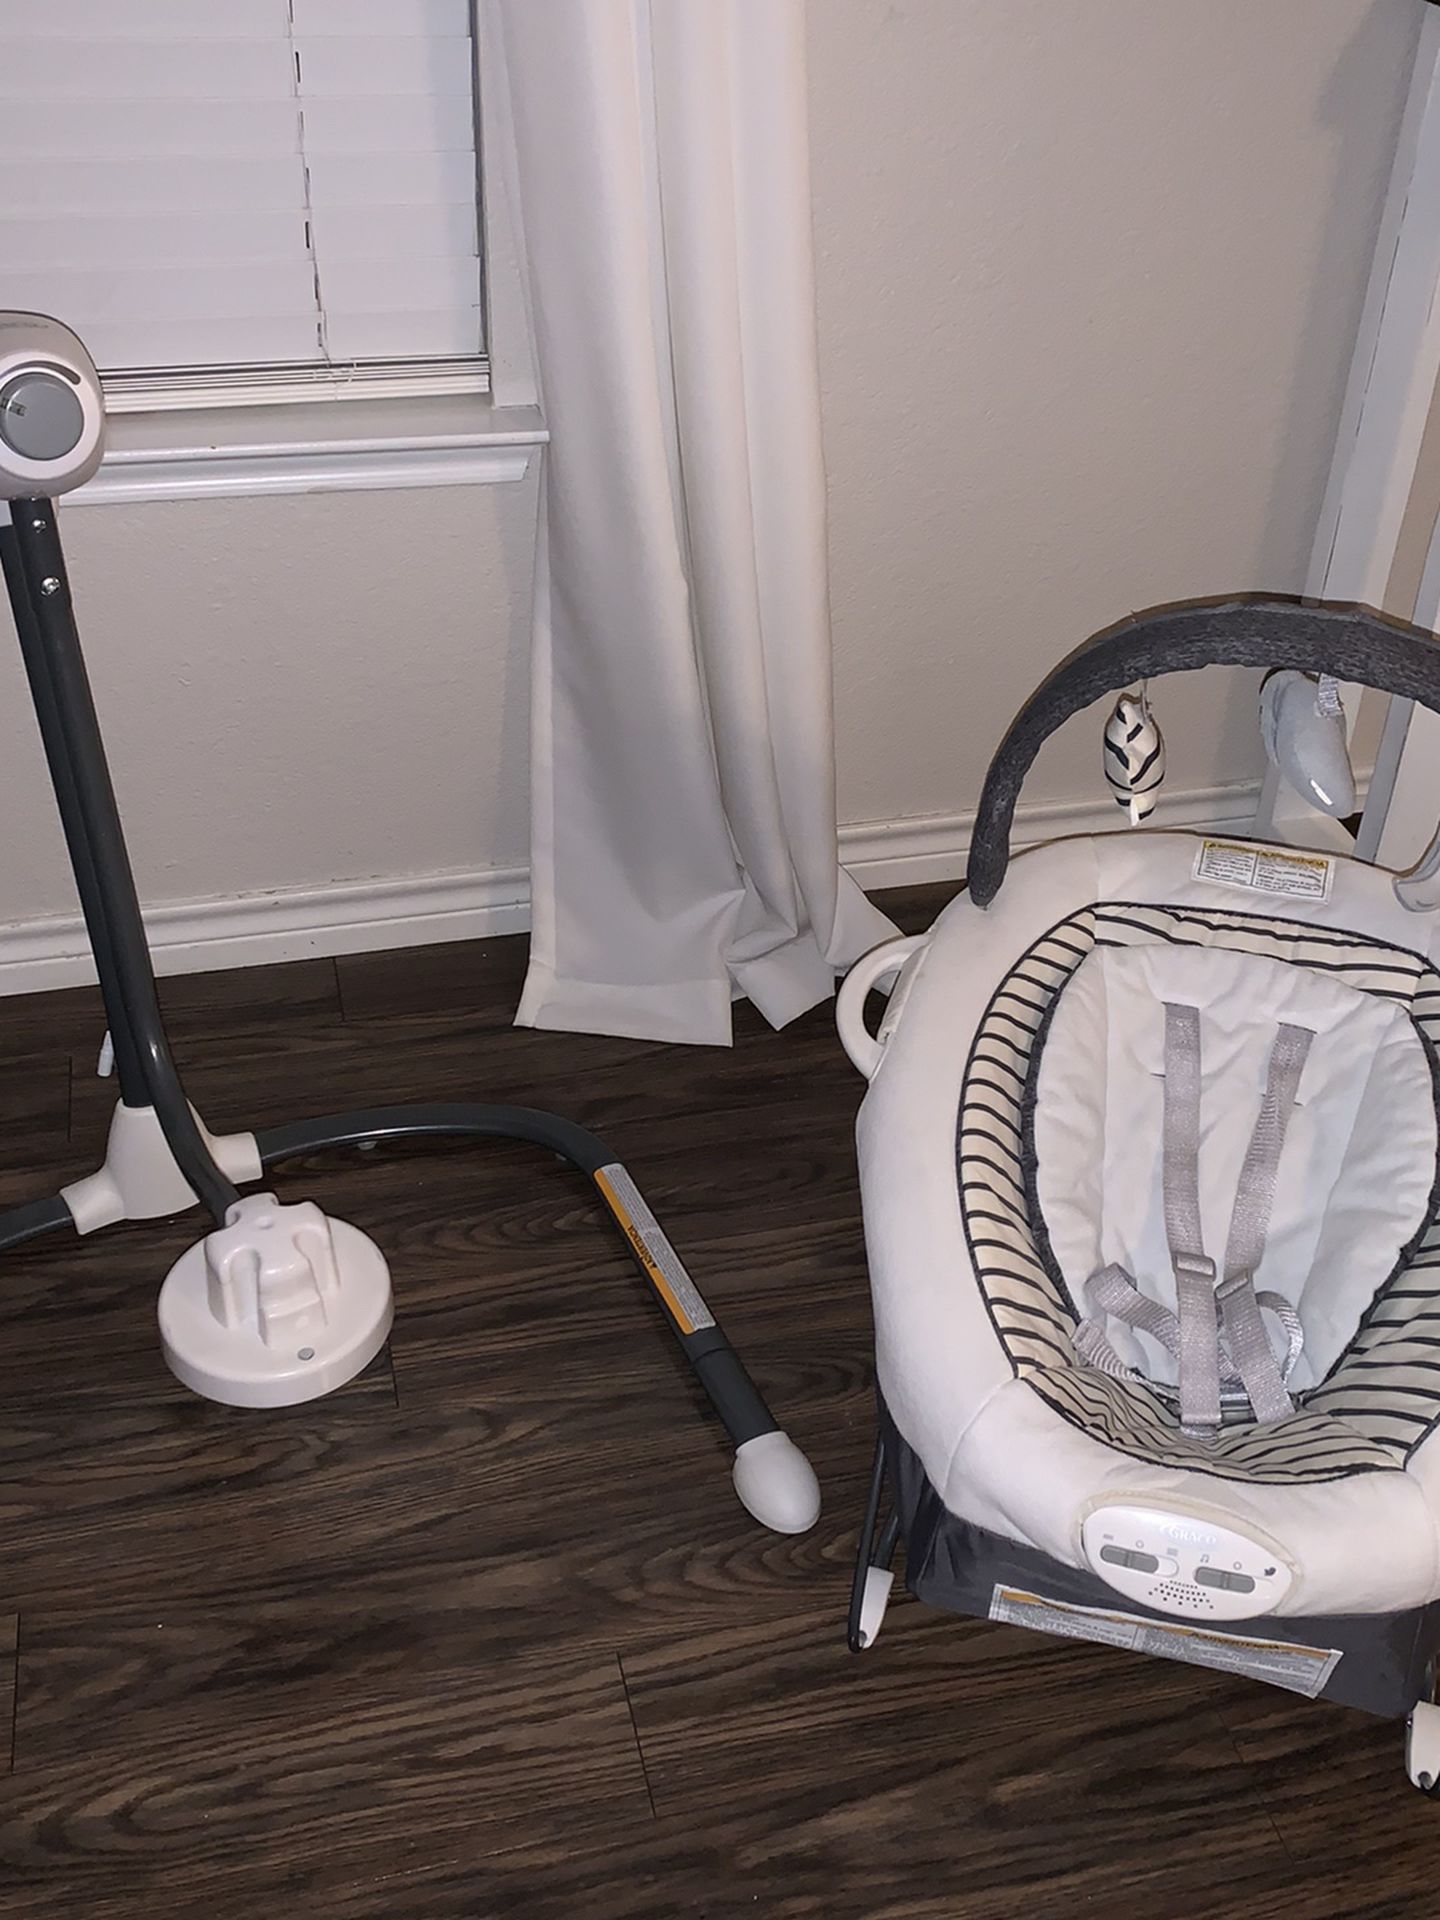 Graco Duet Sway LX Swing with Portable Bouncer